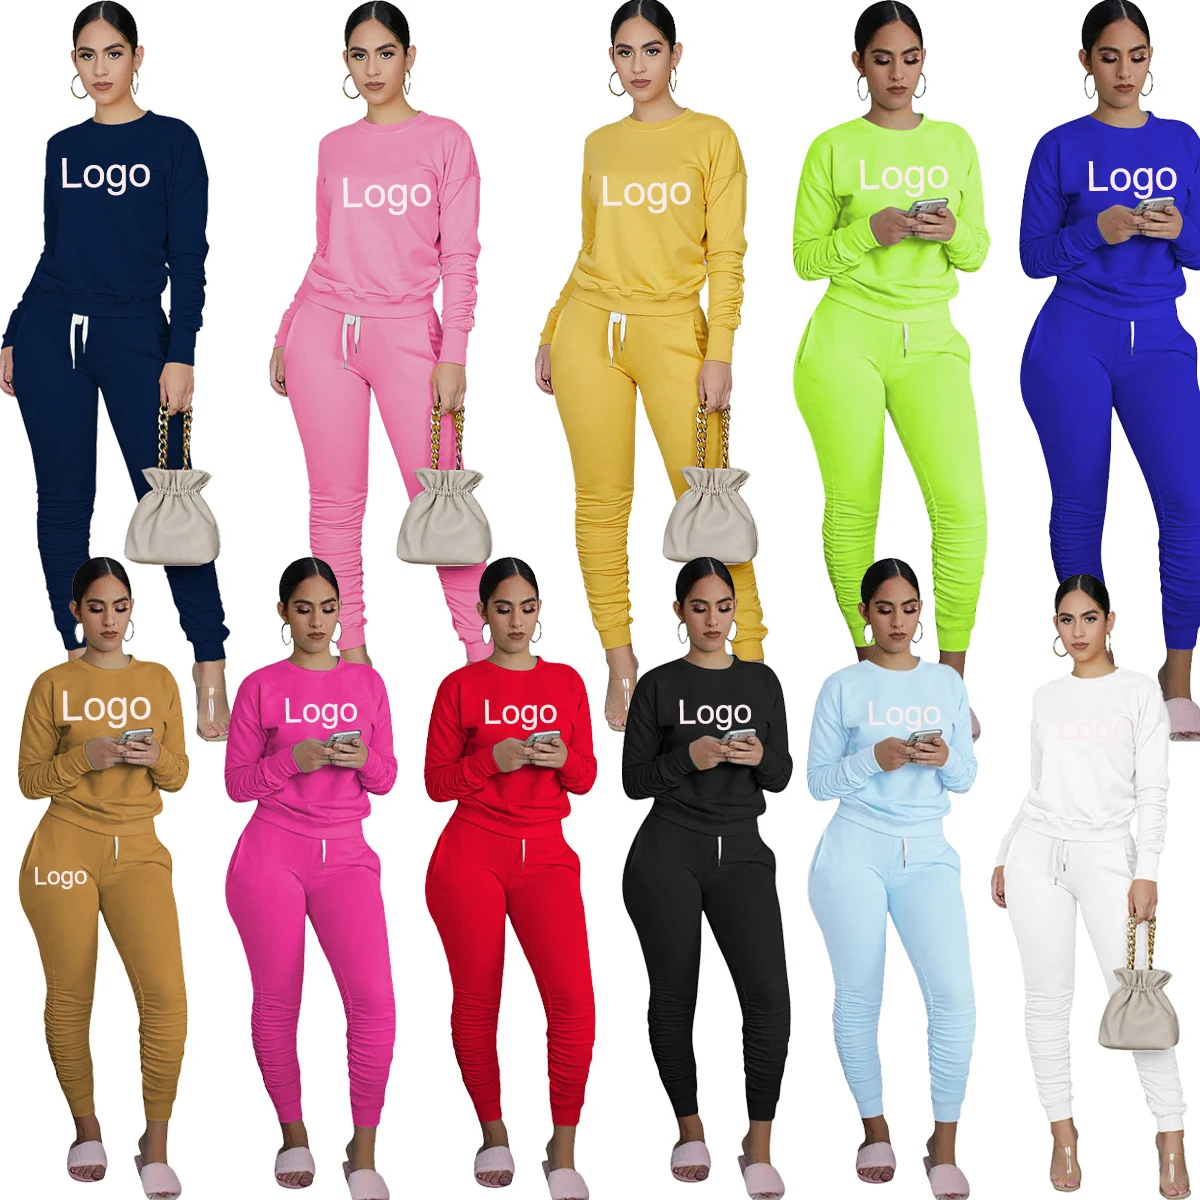 

Femme Boutique Girl Corset Trendy Pants Solid Sweater Jogger Sweatshirt Women s Two Piece Set Sexy Outfit Tracksuit Clothing, Picture